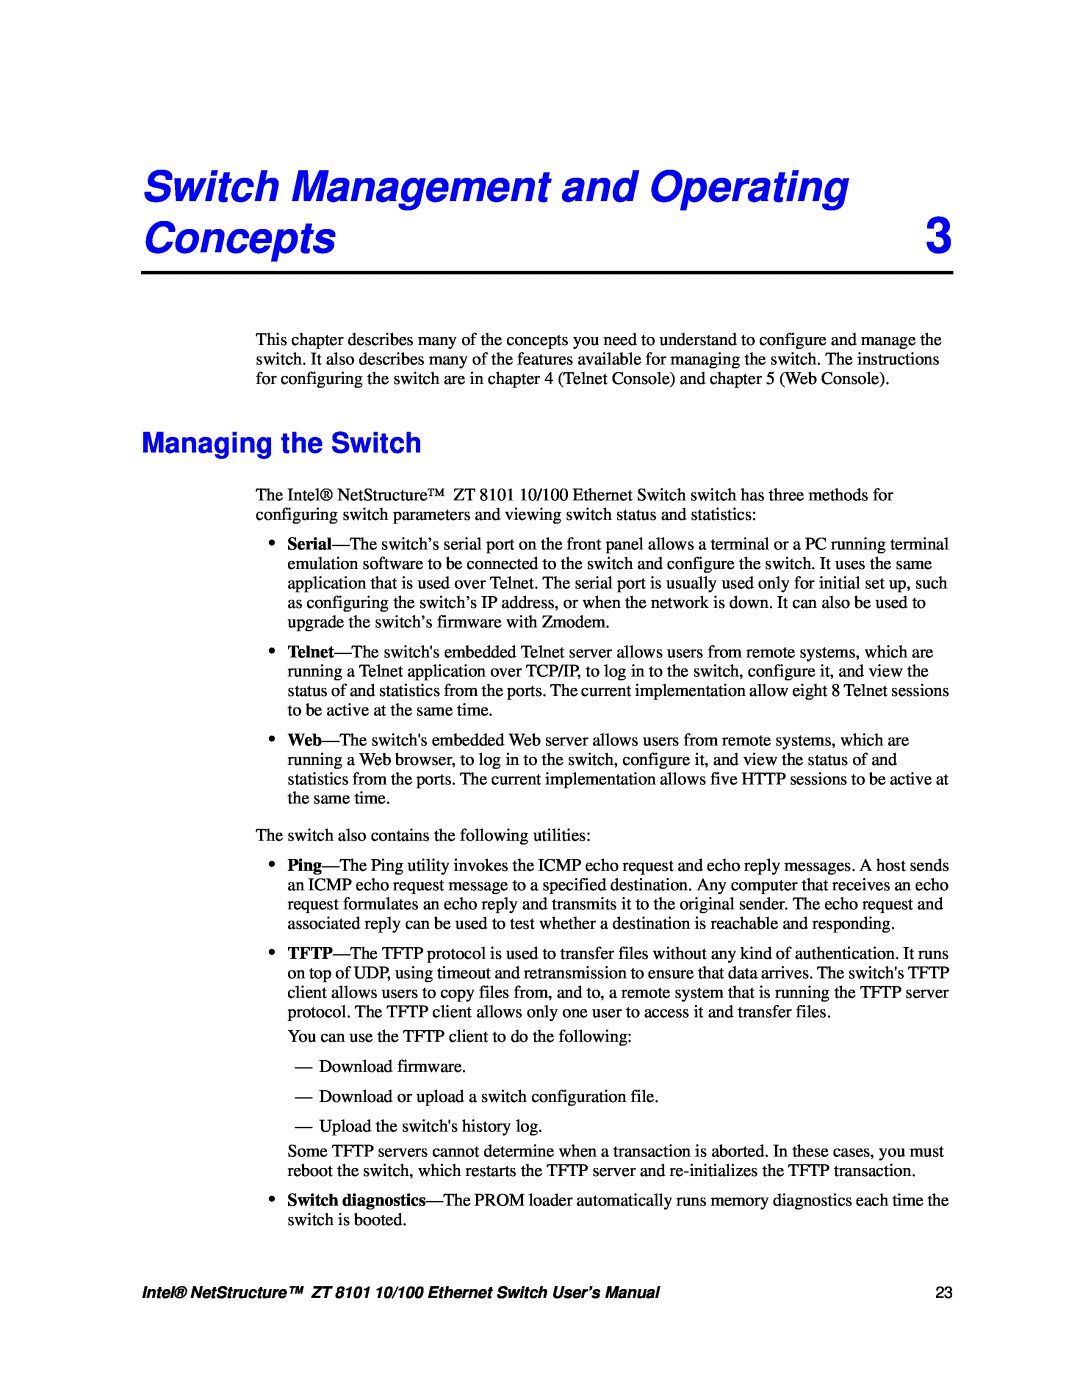 Intel ZT 8101 10/100 user manual Switch Management and Operating, Concepts, Managing the Switch 